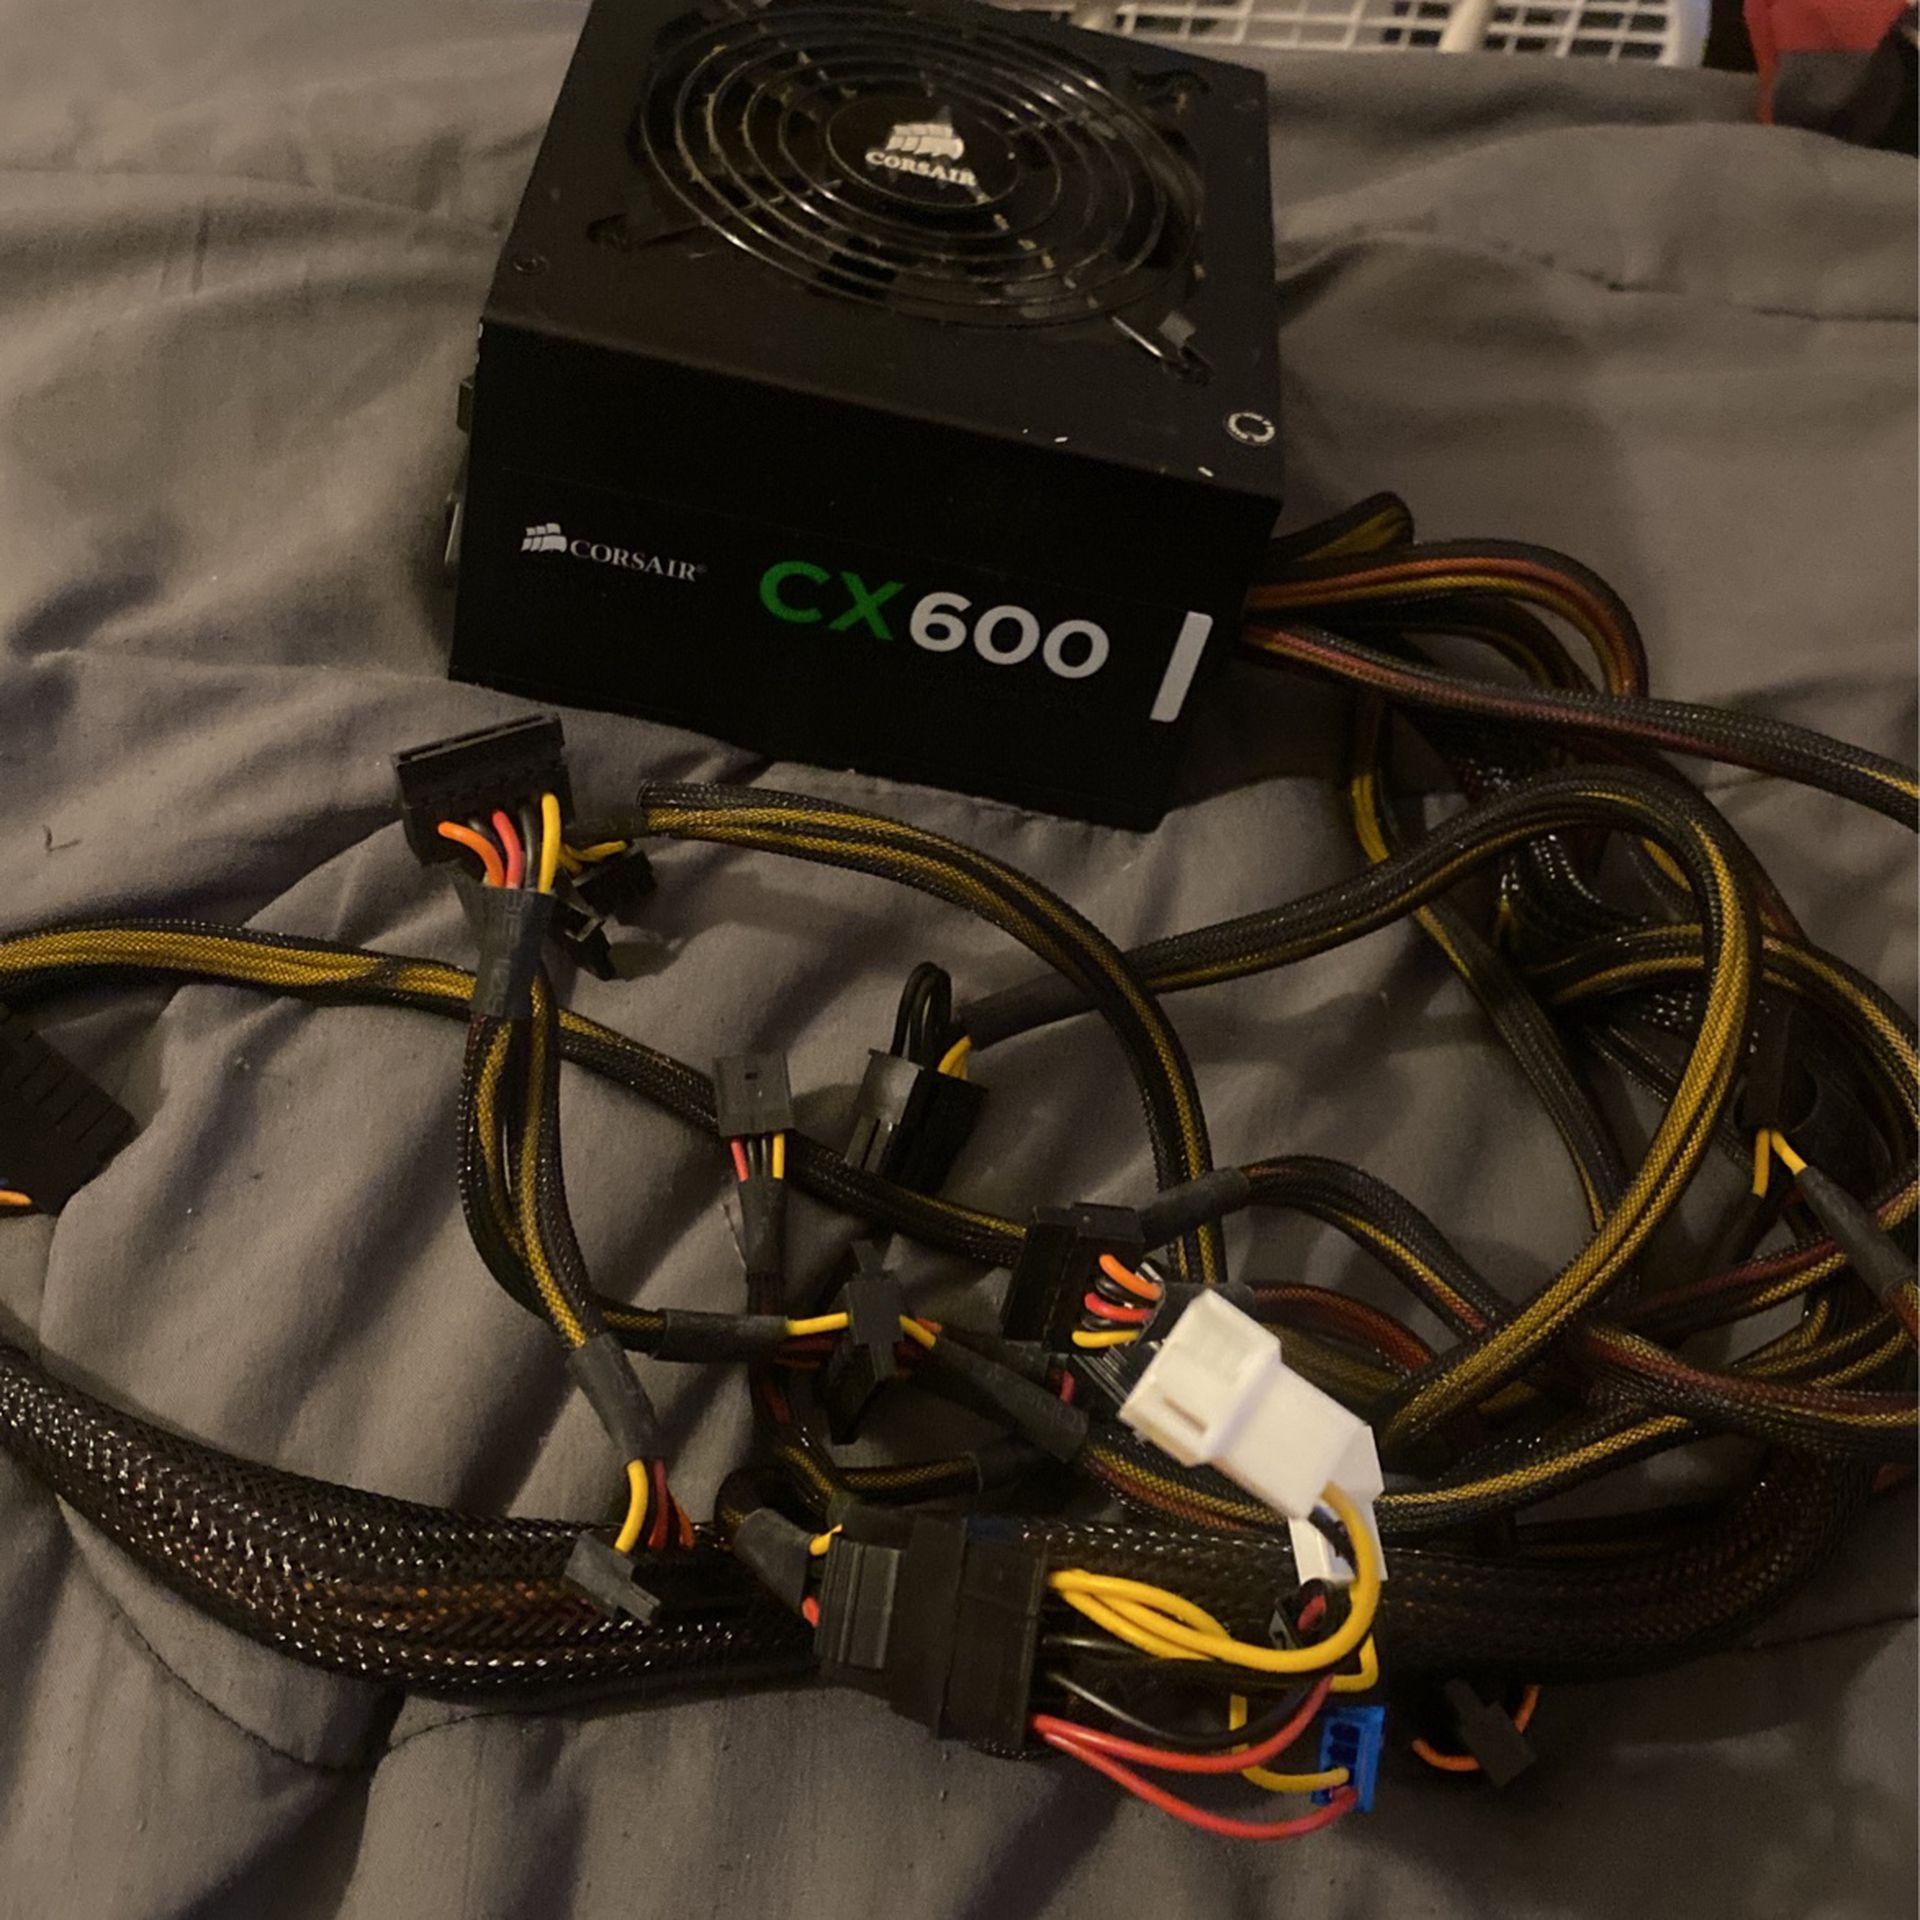 Corsair Power Supply for Sale in Port Lucie, FL -